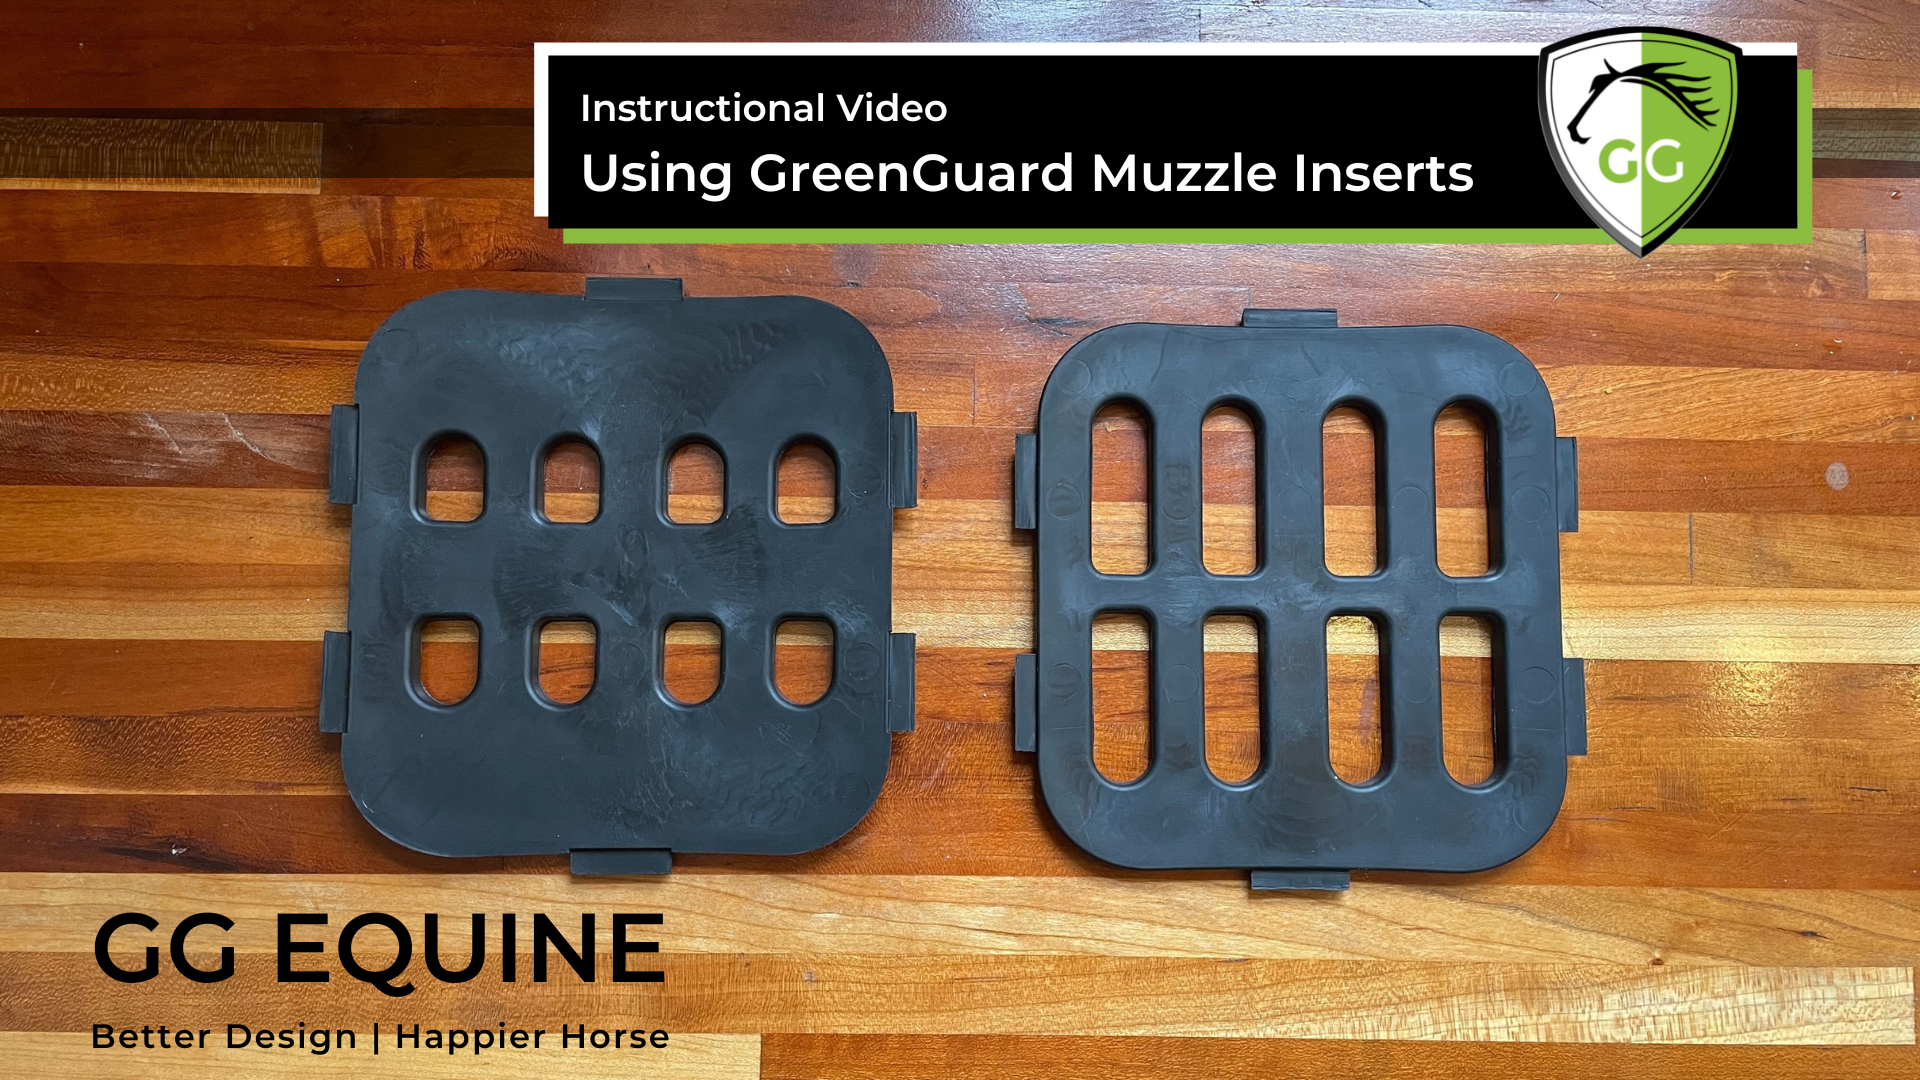 Load video: The primary video tutorial for preparing and using the standard rubber GreenGuard muzzle insert.